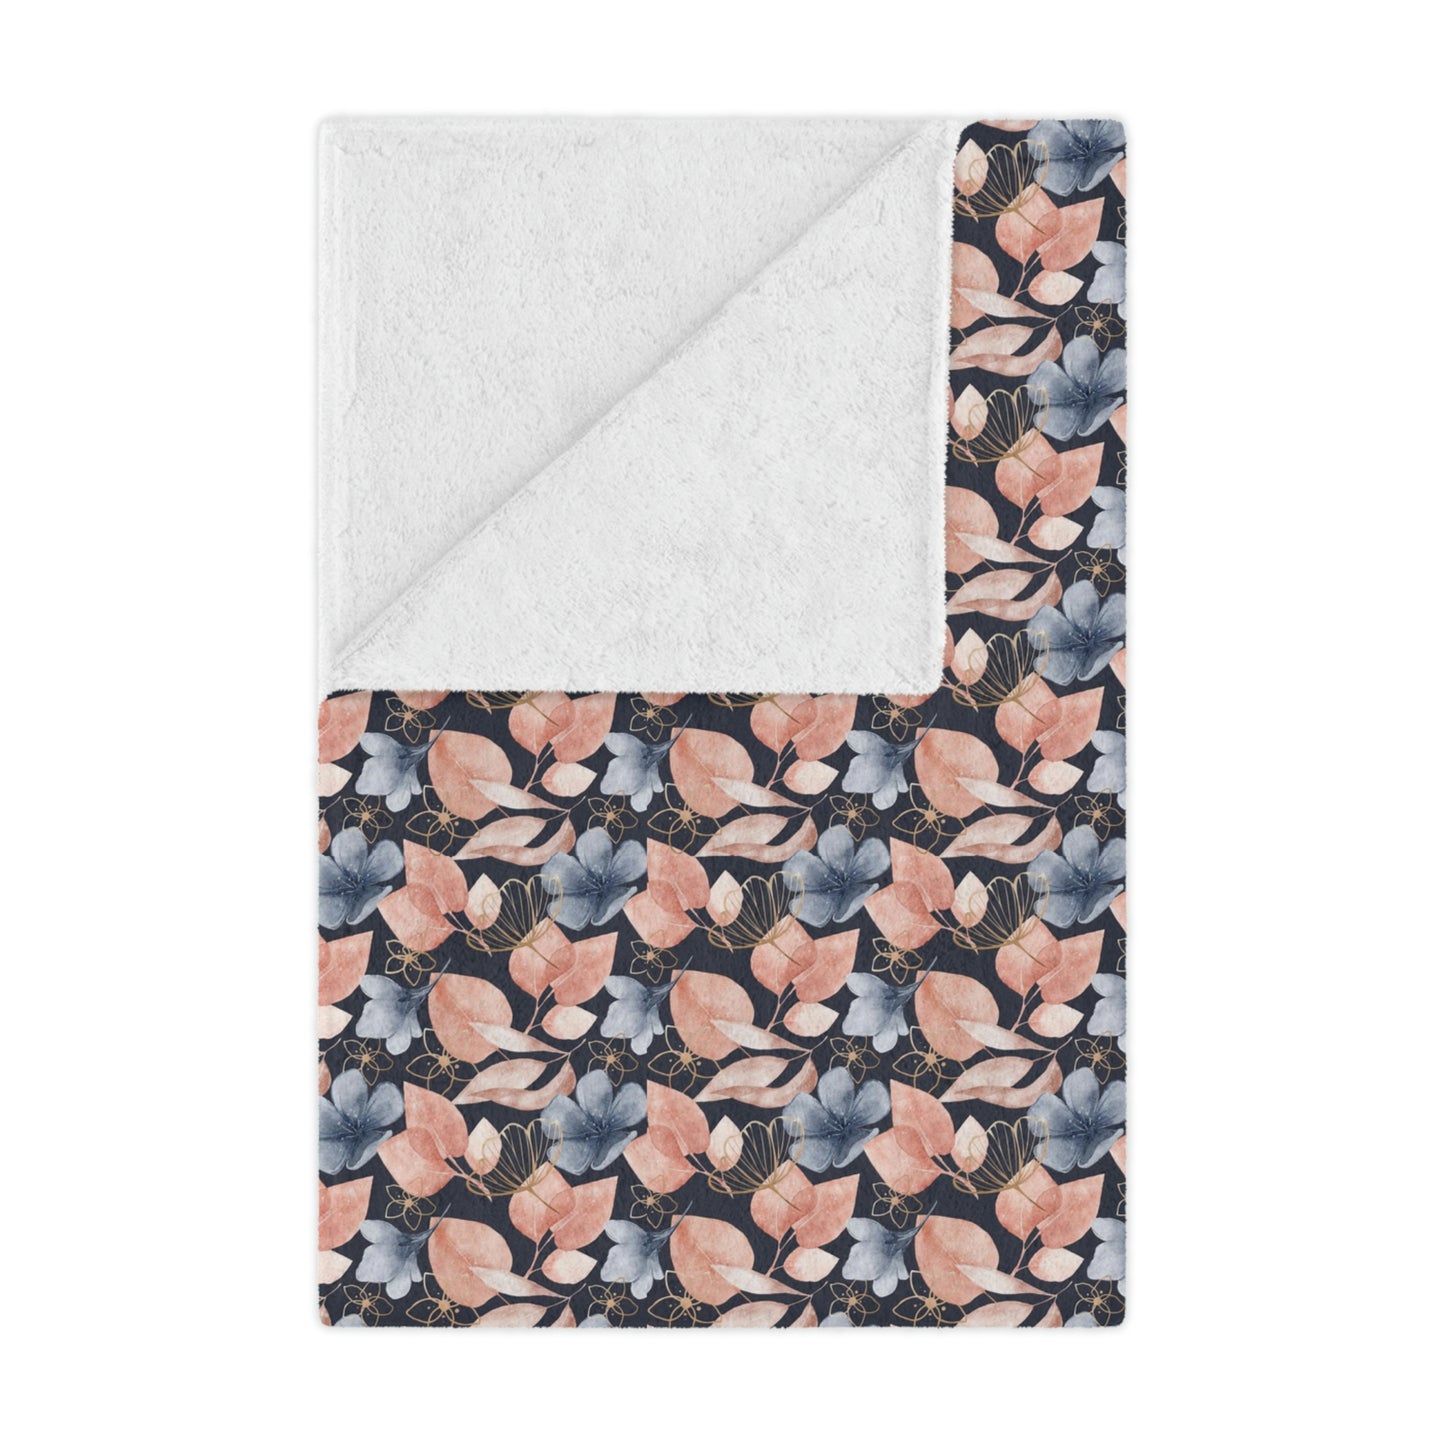 pink and blue floral throw blanket lying on a bed, pink flowers on a blue blanket on bed, pink and blue plush throw blanket beside pillows on a bed